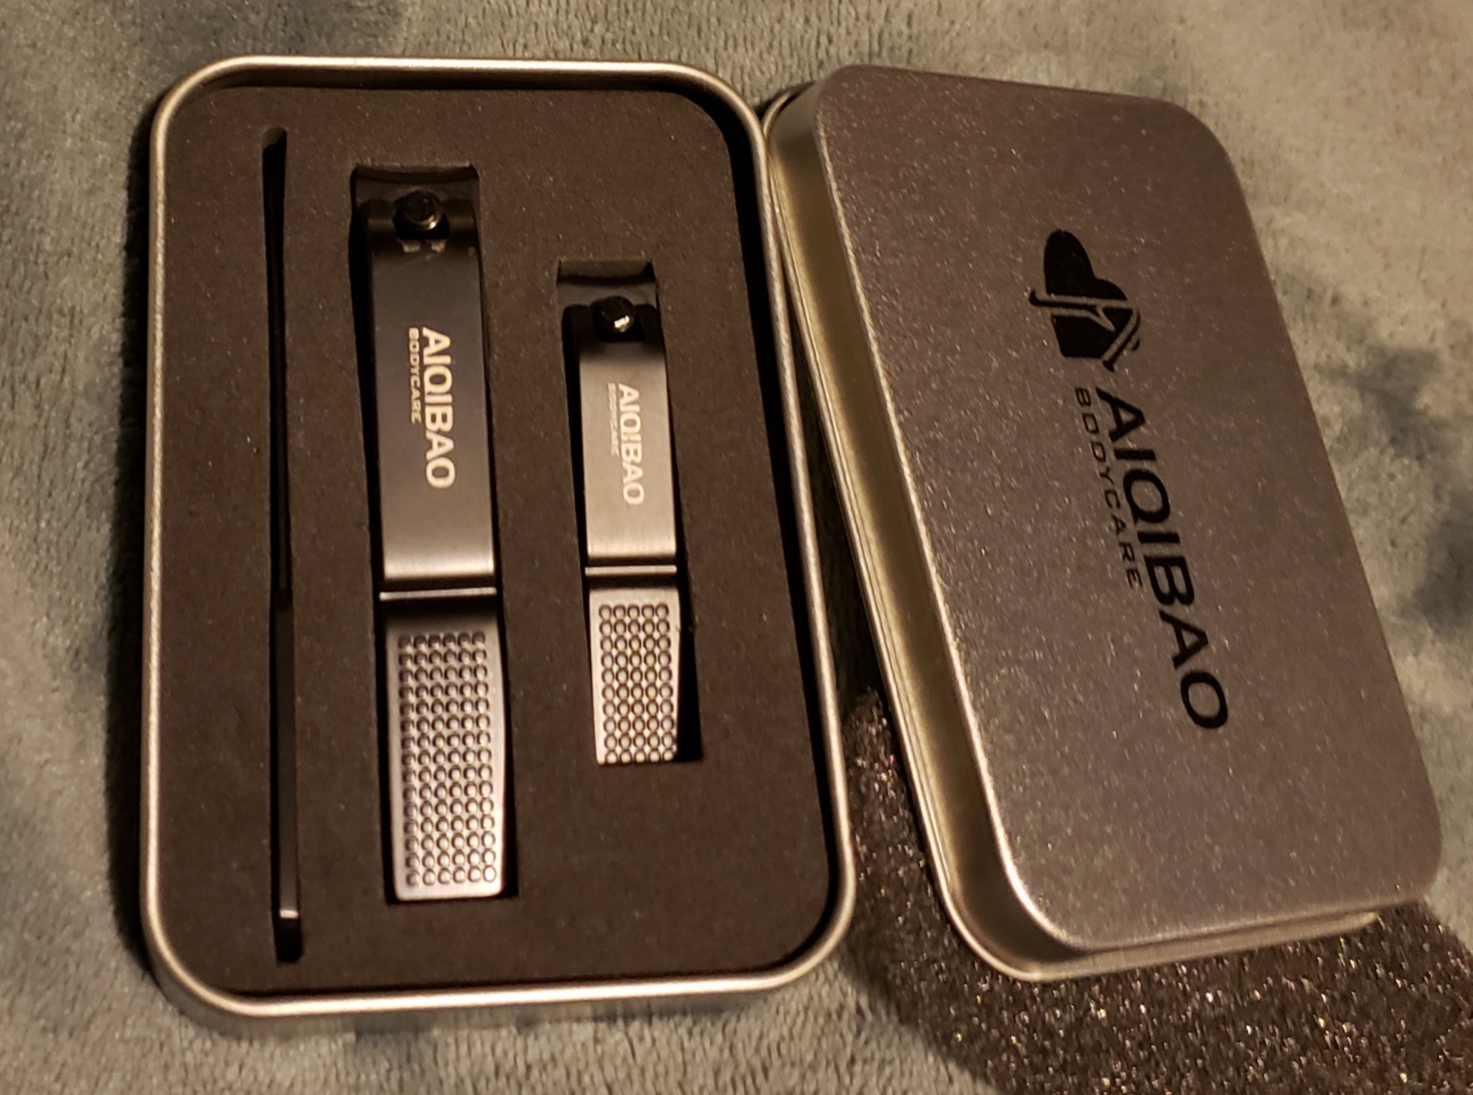 The best 3 piece stainless steel nail clipper set that I have ever owned.